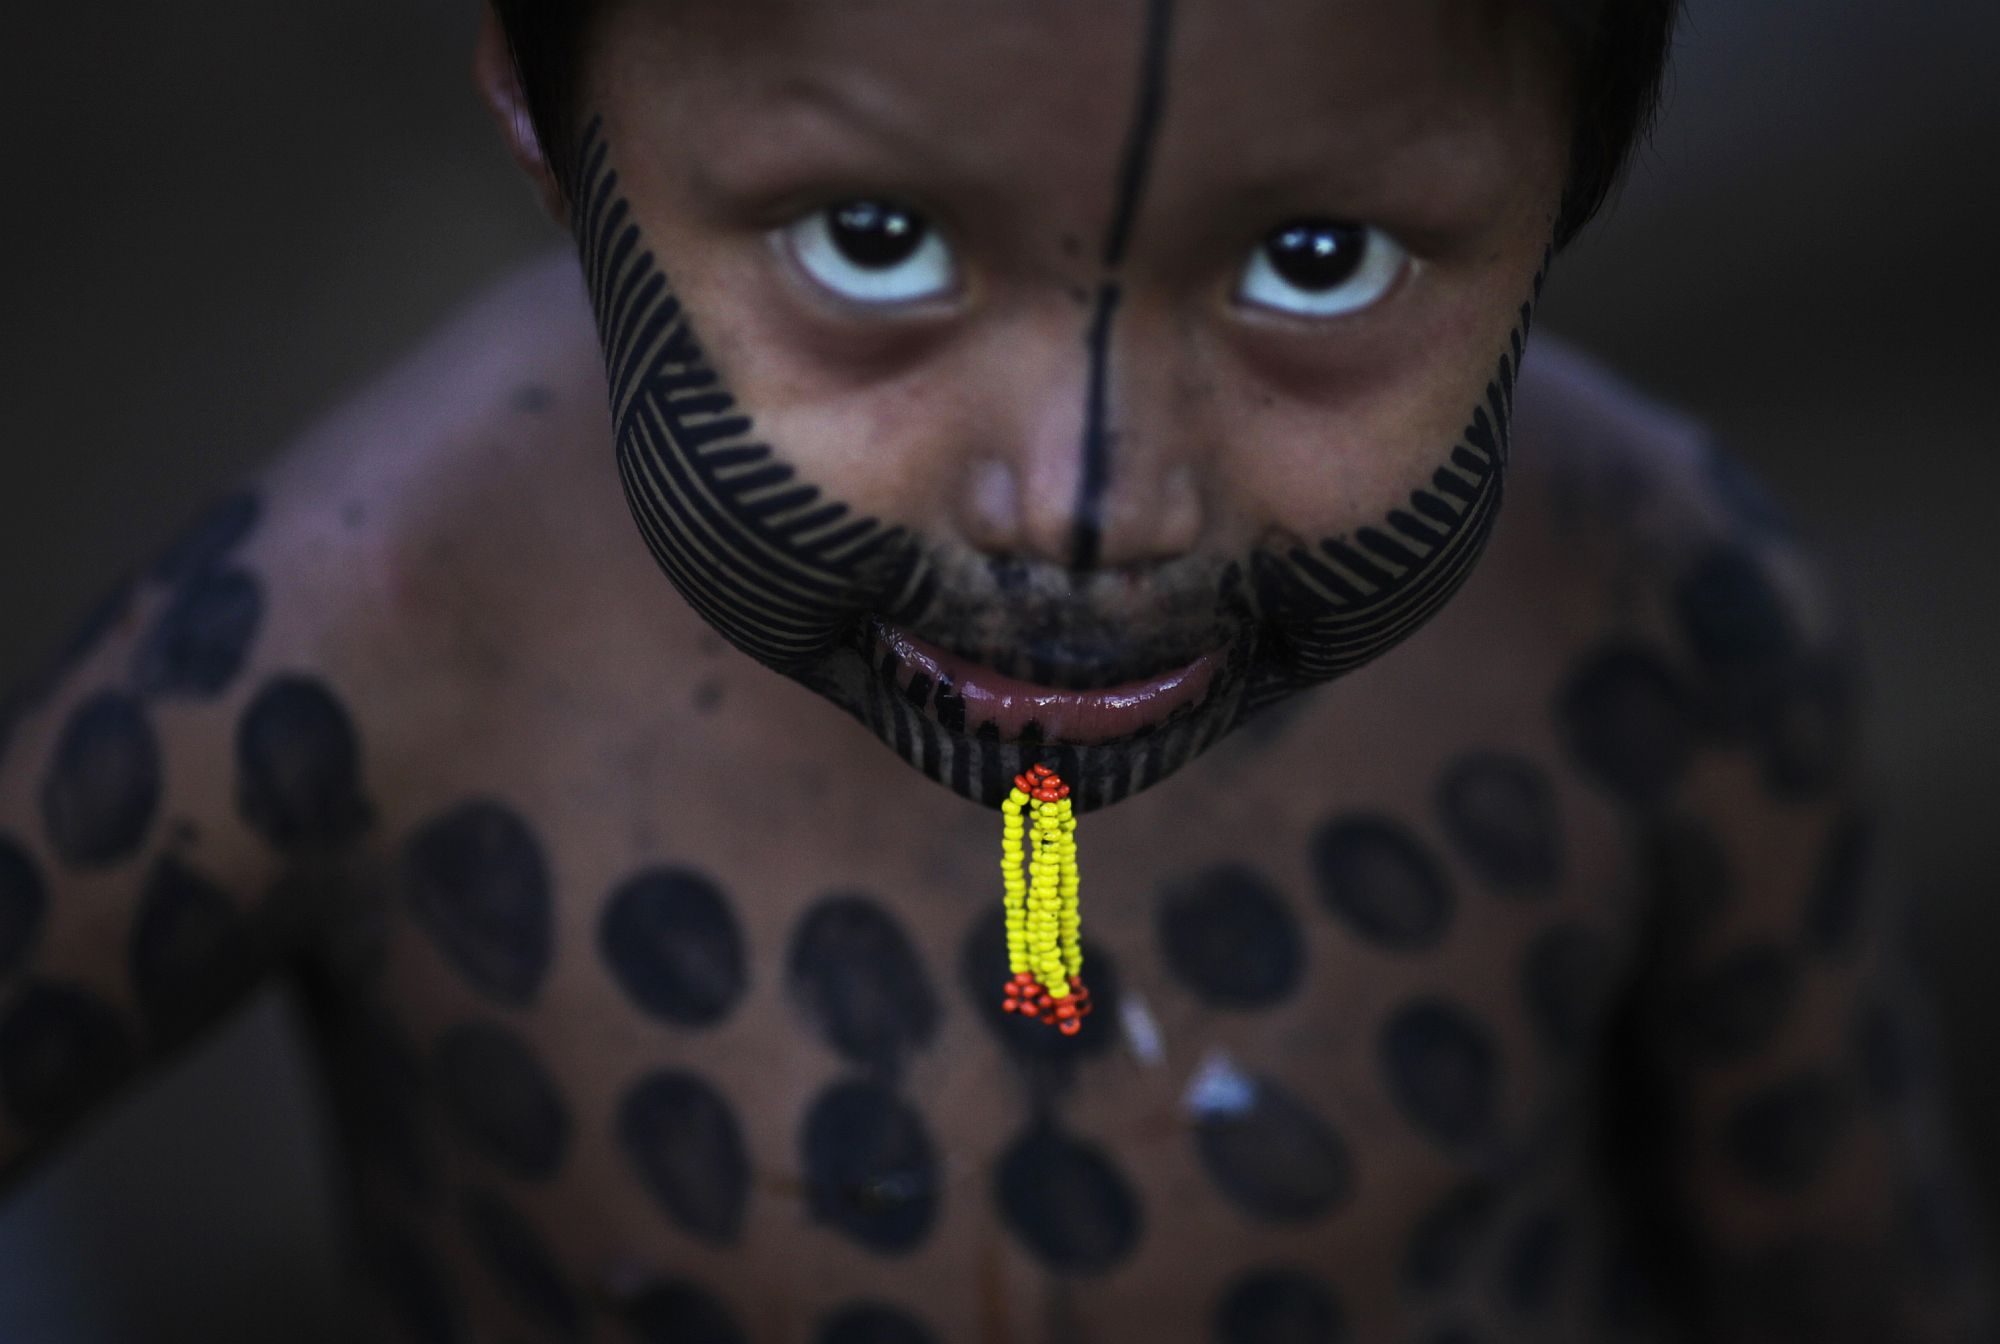 A Kayapo boy with traditional body paint and piercing is seen at his home in Kikretum